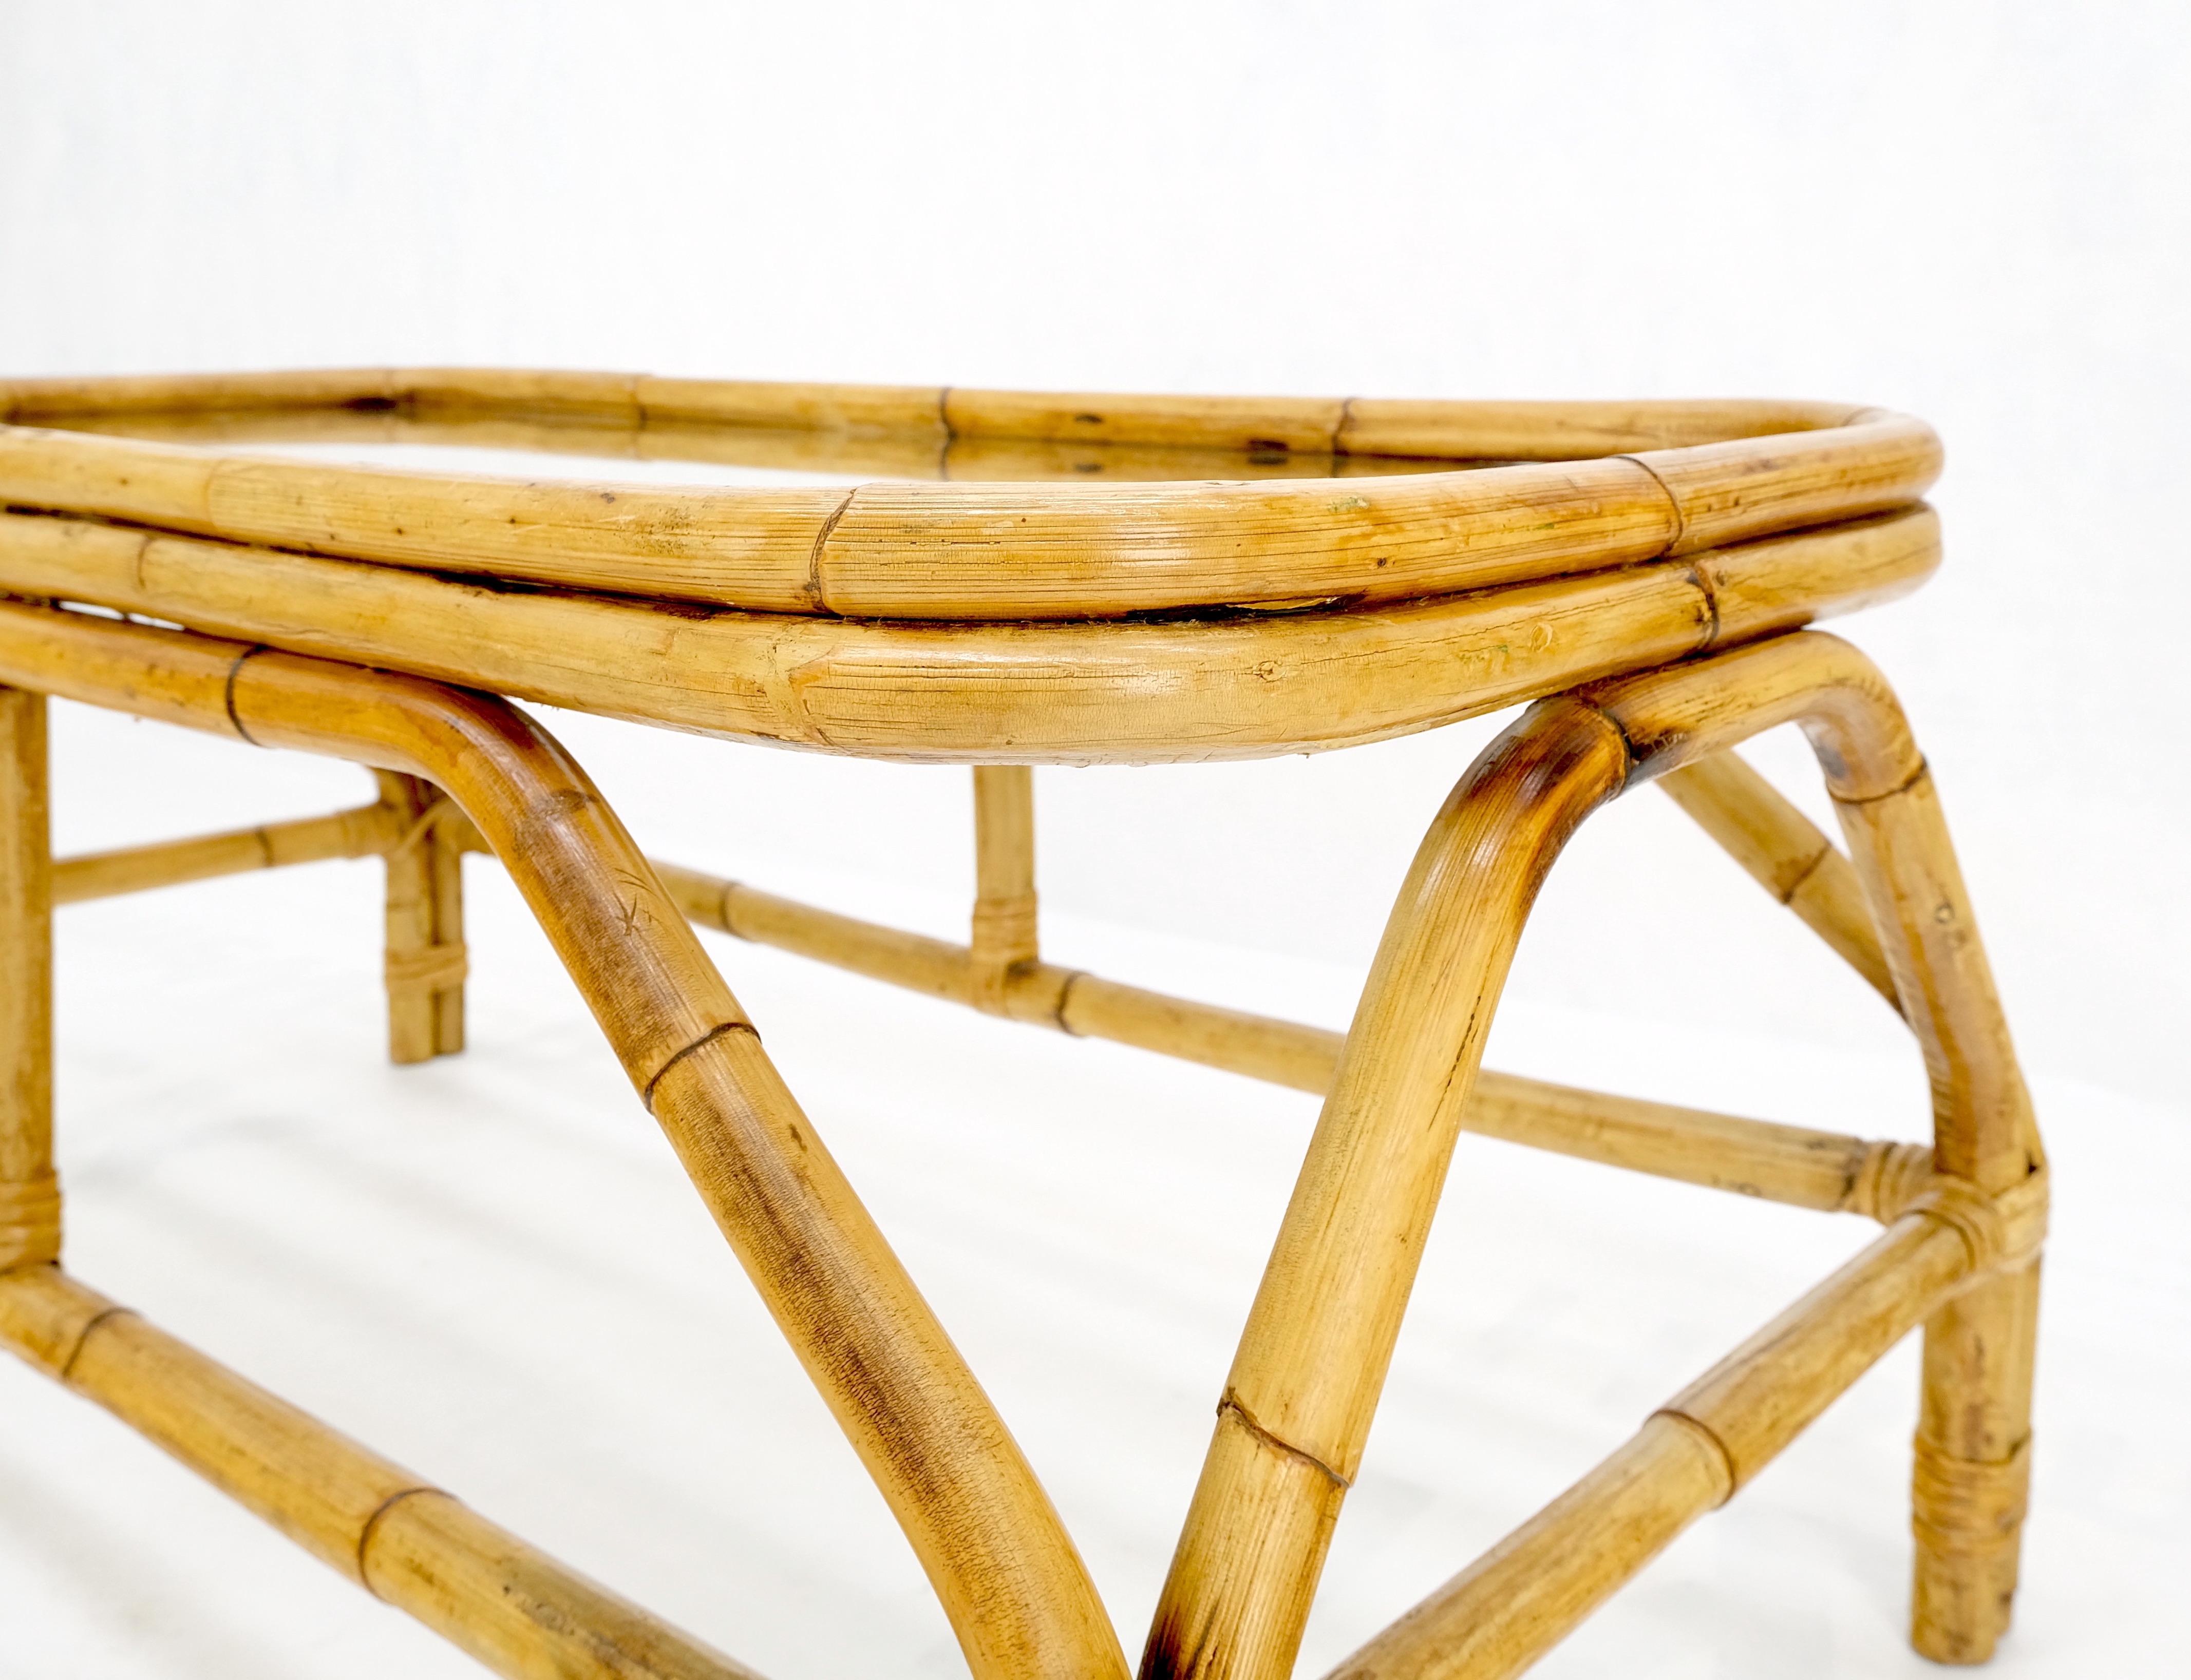 Rattan Bamboo Rectangle Glass Top Mid-Century Modern Coffee Table Mnt! In Good Condition For Sale In Rockaway, NJ